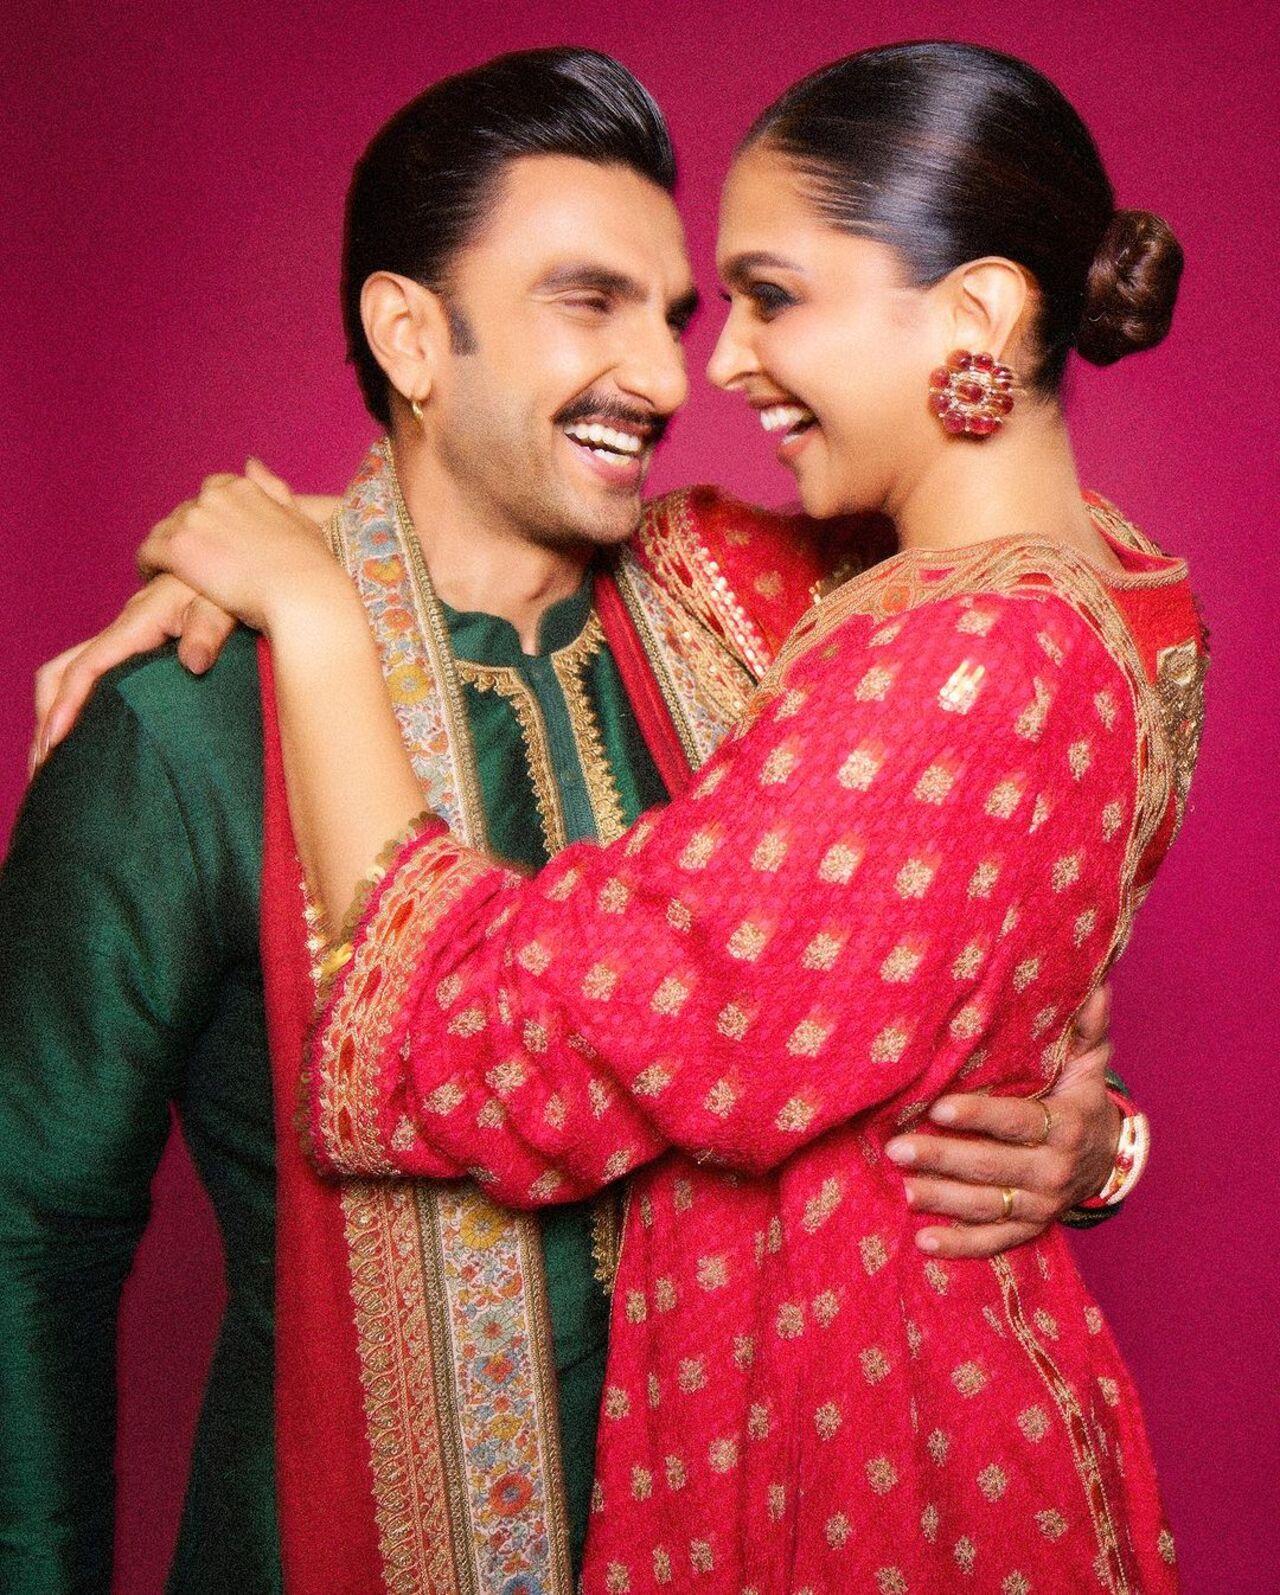 Deepika Padukone-Ranveer Singh: Deepika Padukone and Ranveer Singh's chemistry isn't unknown to people. It will be interesting to watch them together and be a part of their madness